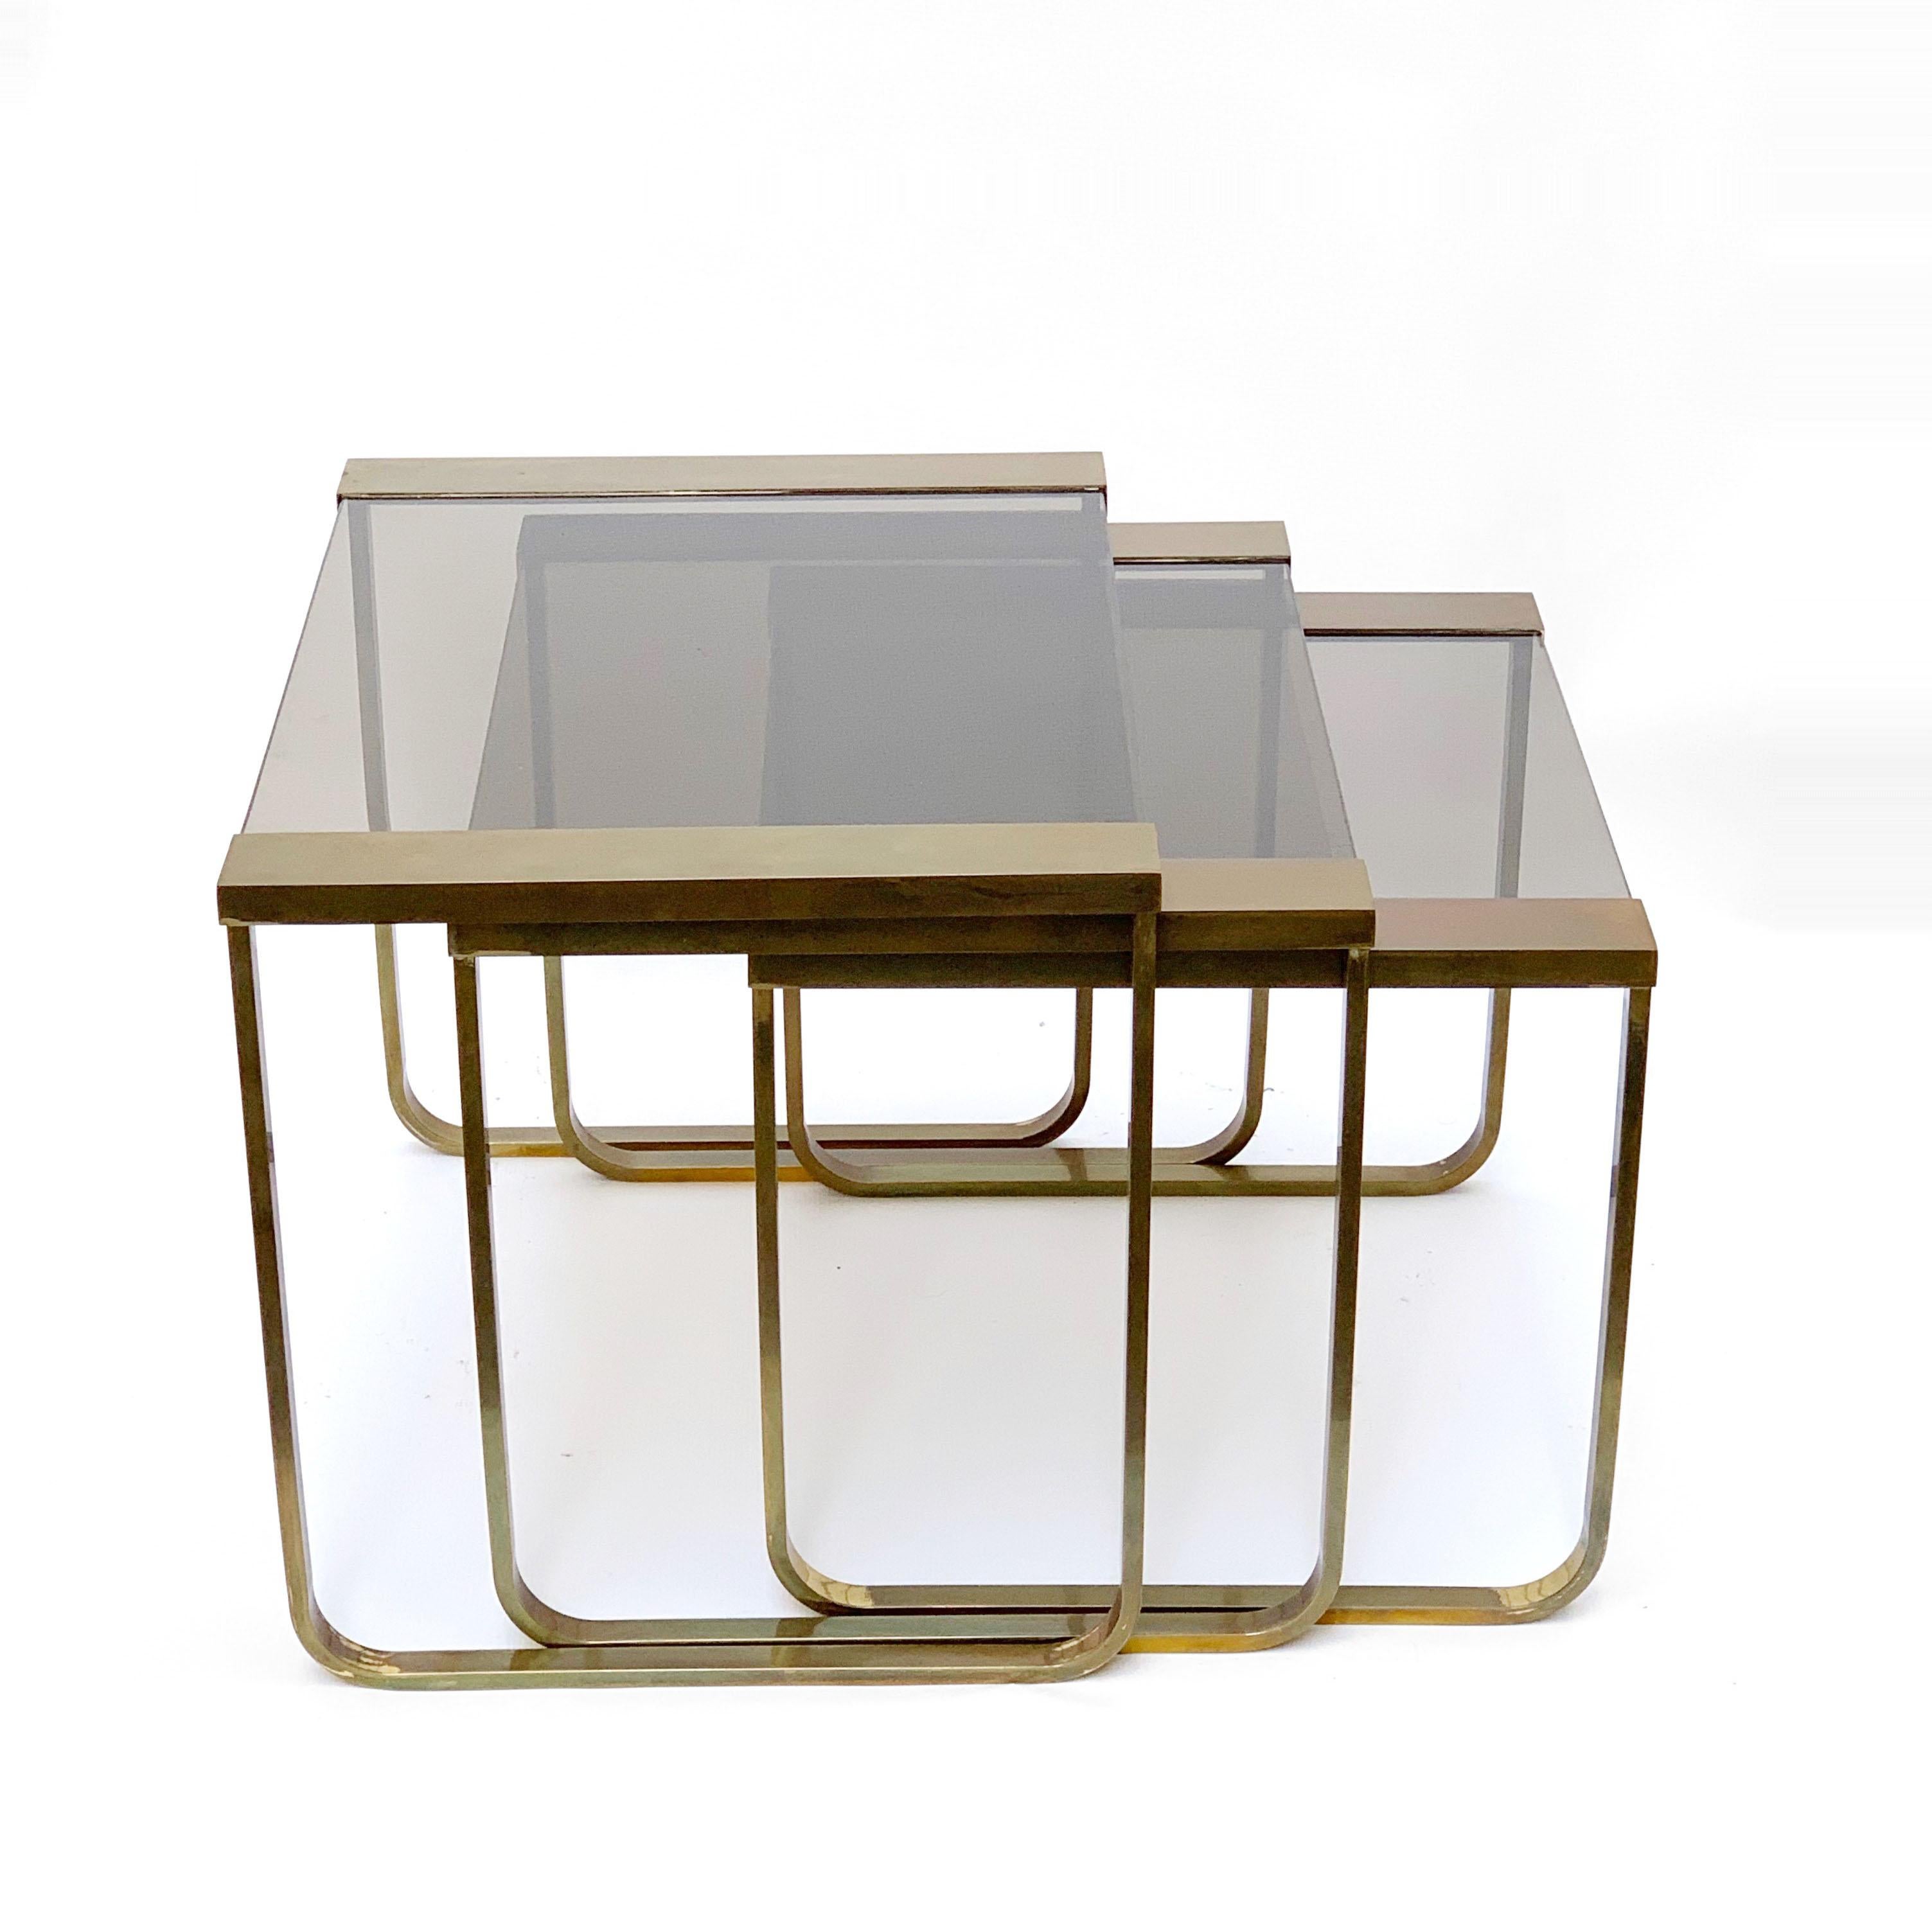 Burnished Set of Three Interlocking Tables in Satin Brass and Smoked Glass, France, 1970s